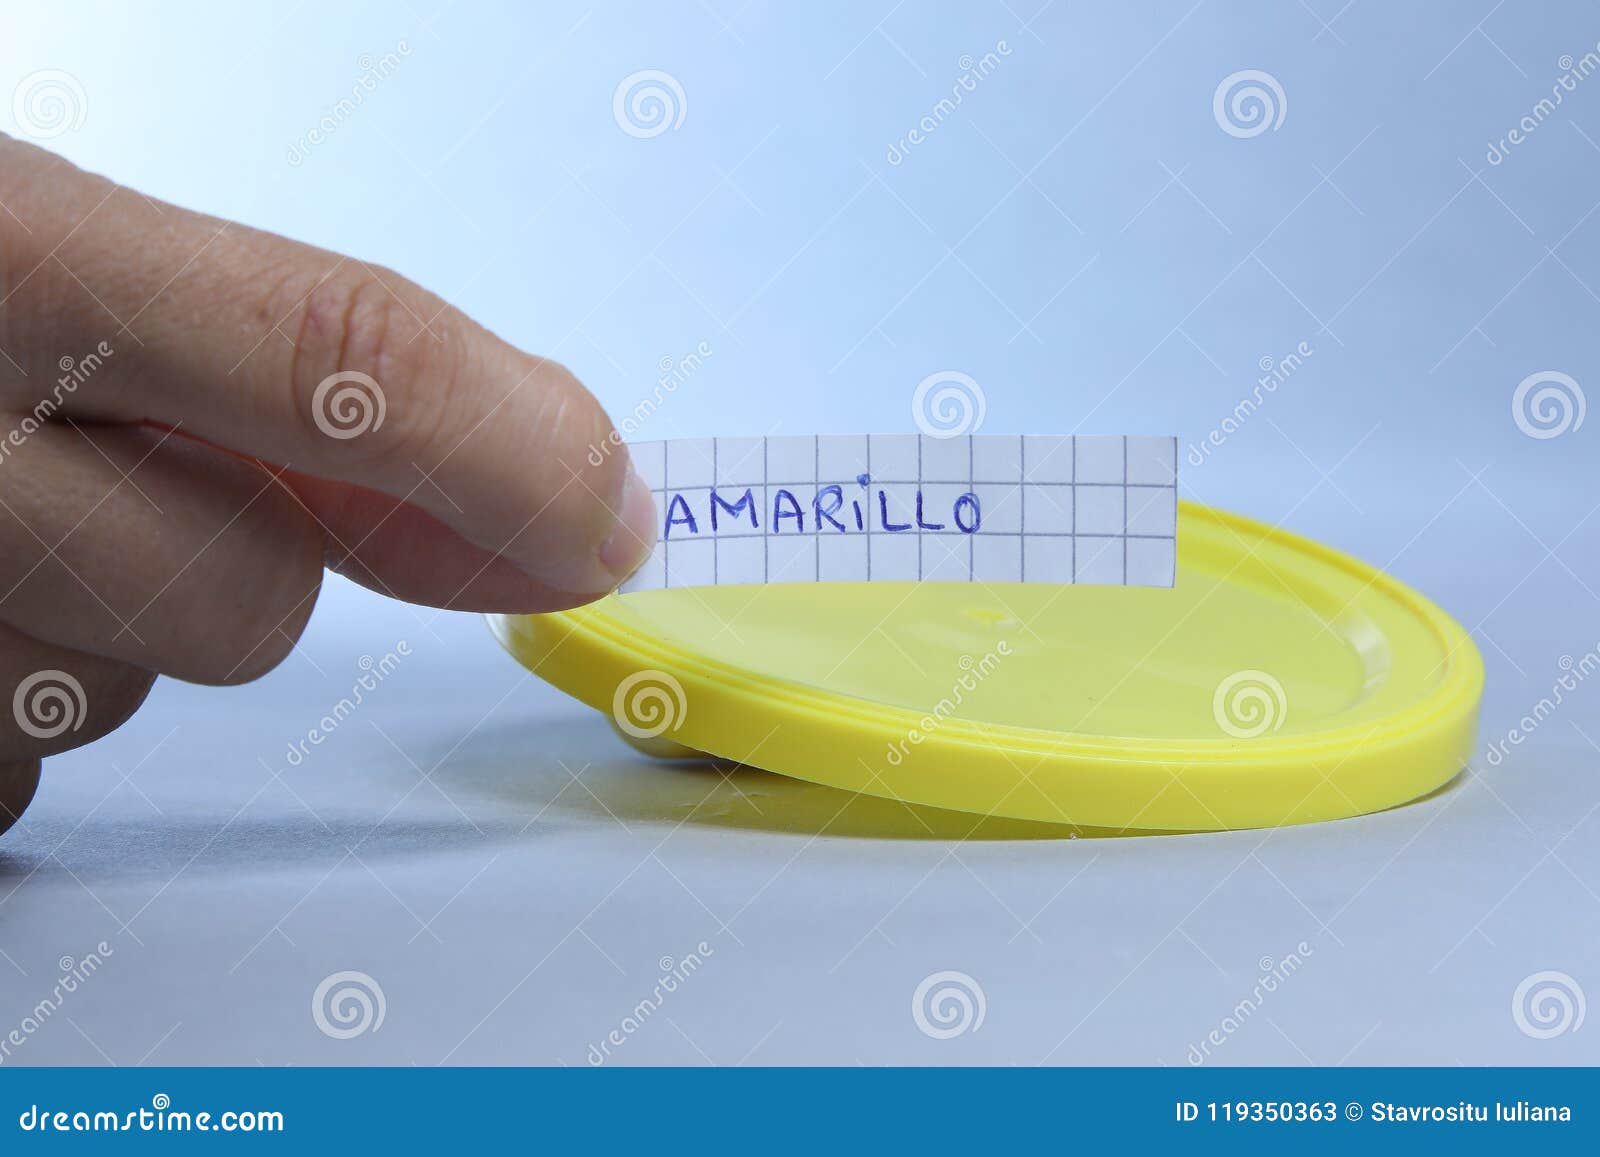 yellow lid with small blank note. amarillo the spanish word for yellow